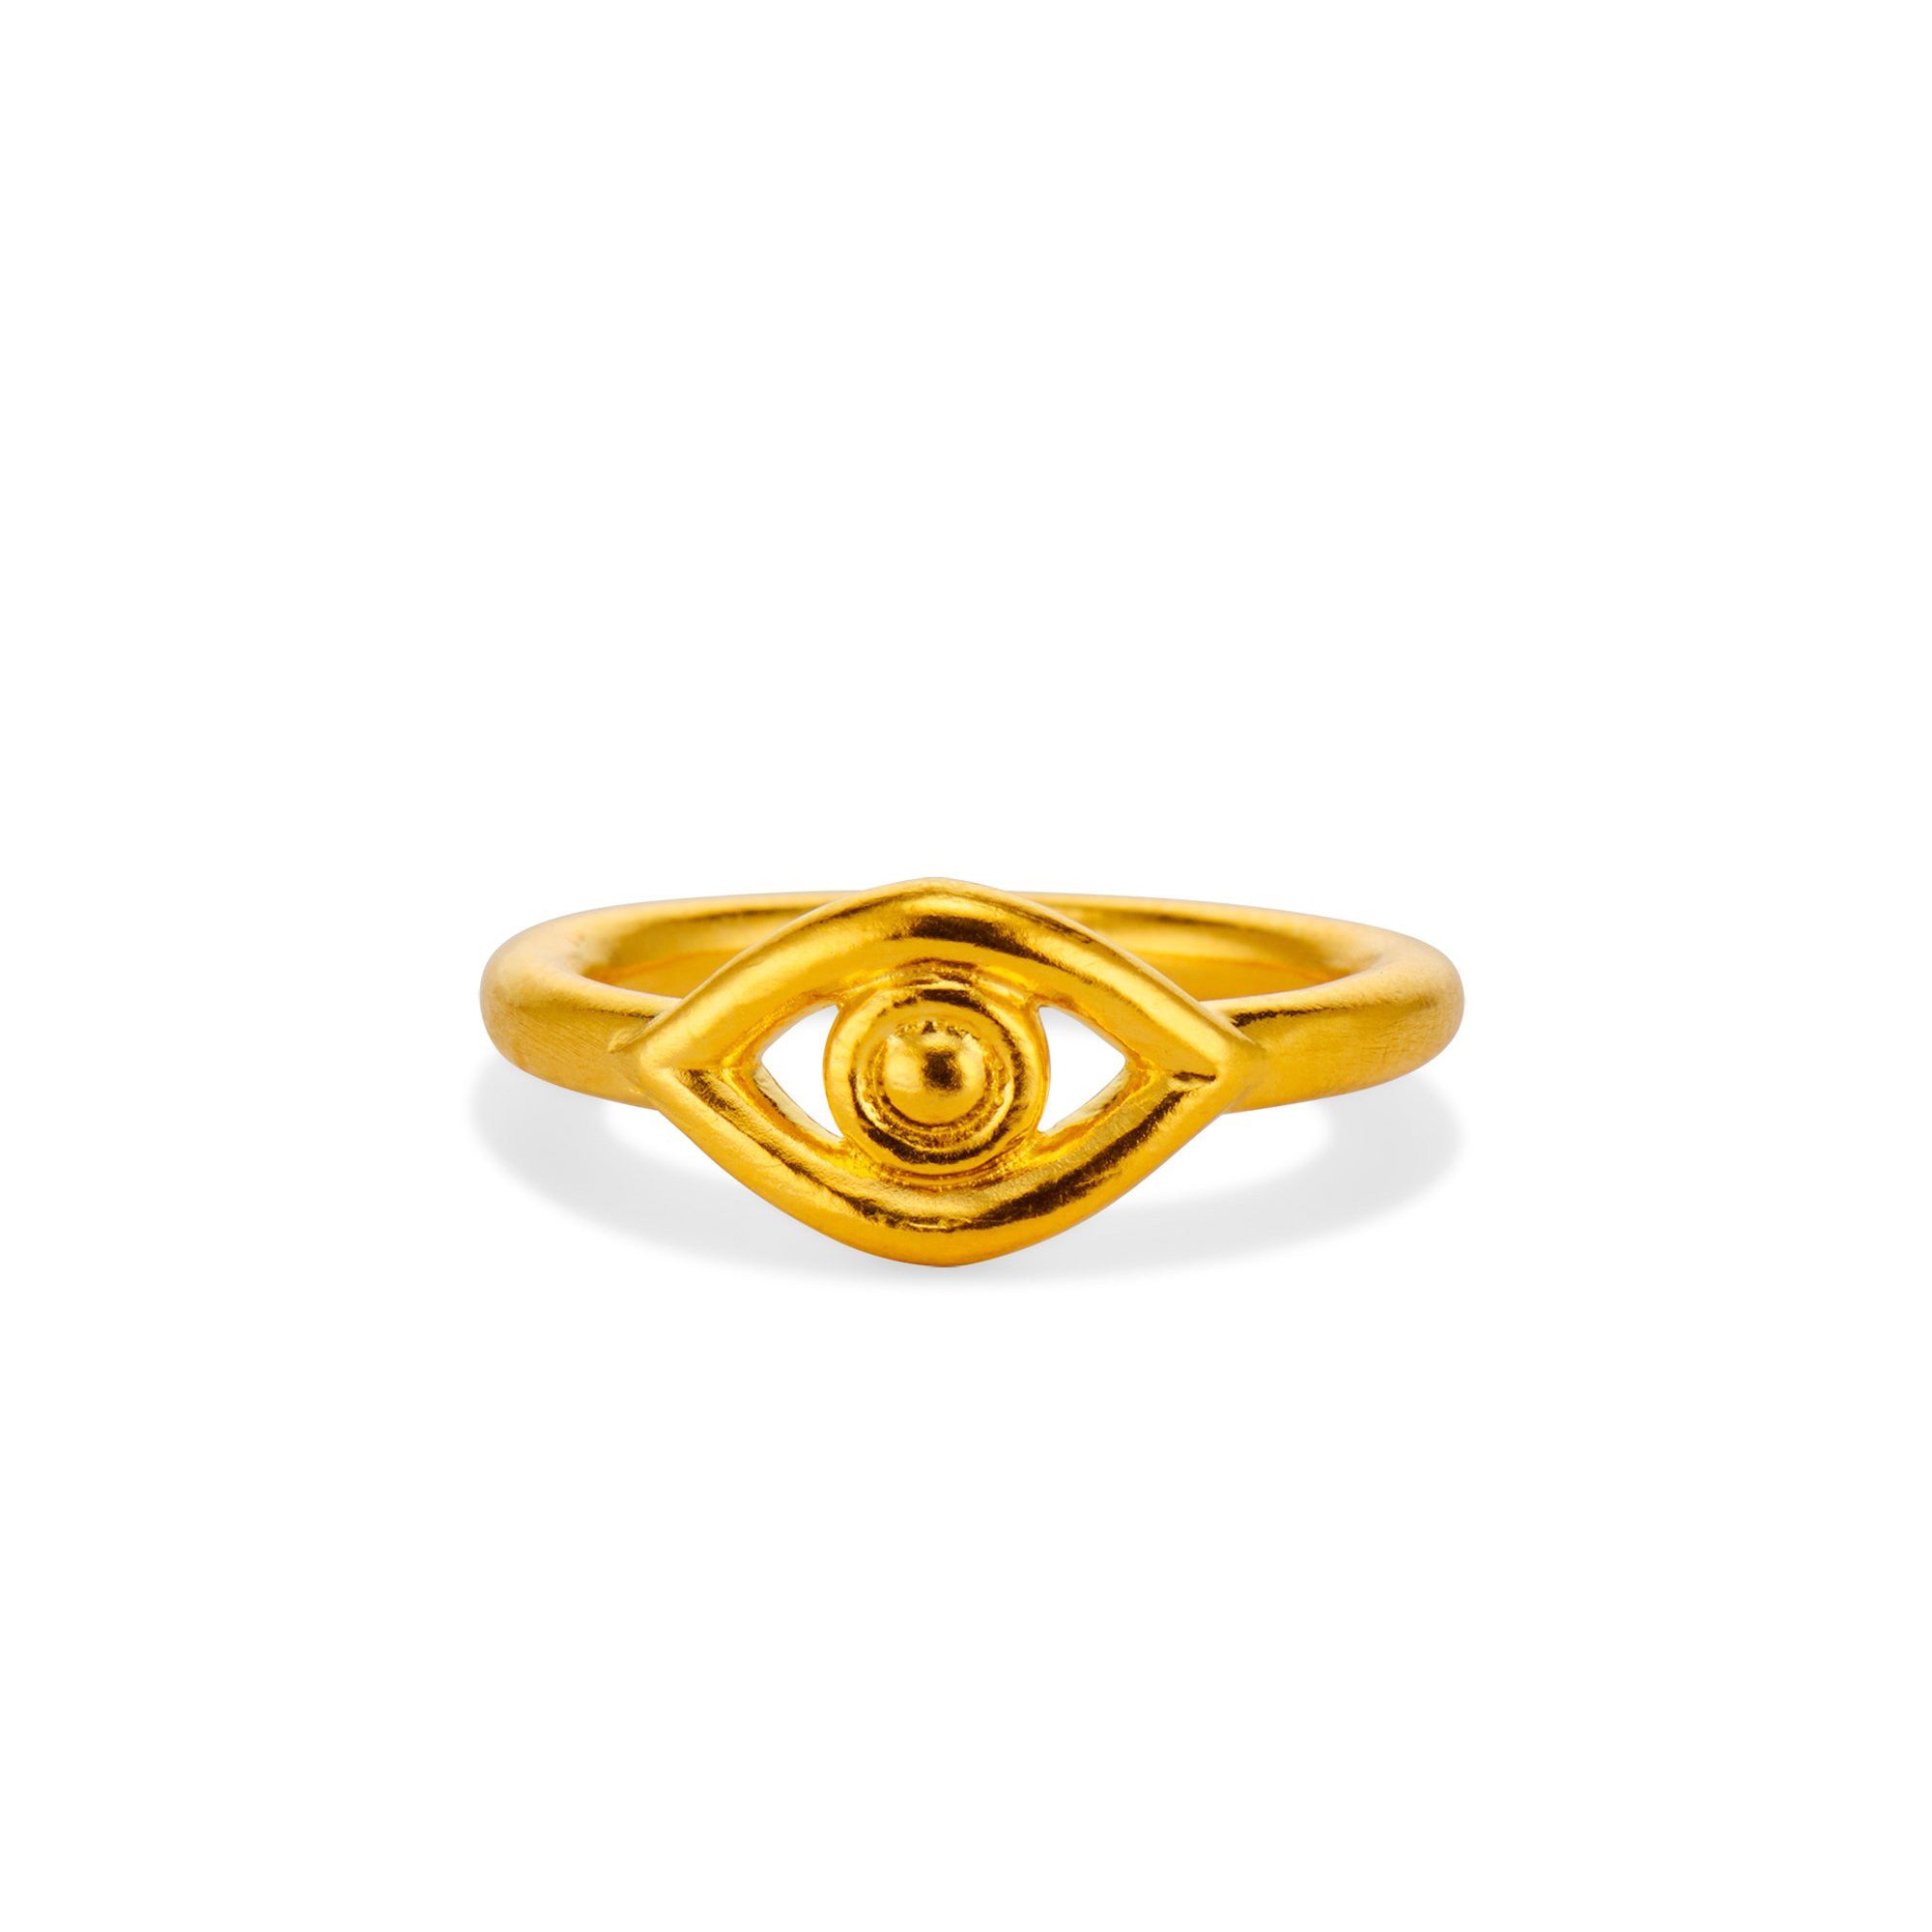 Solid Gold Initial Ring | Katie Dean